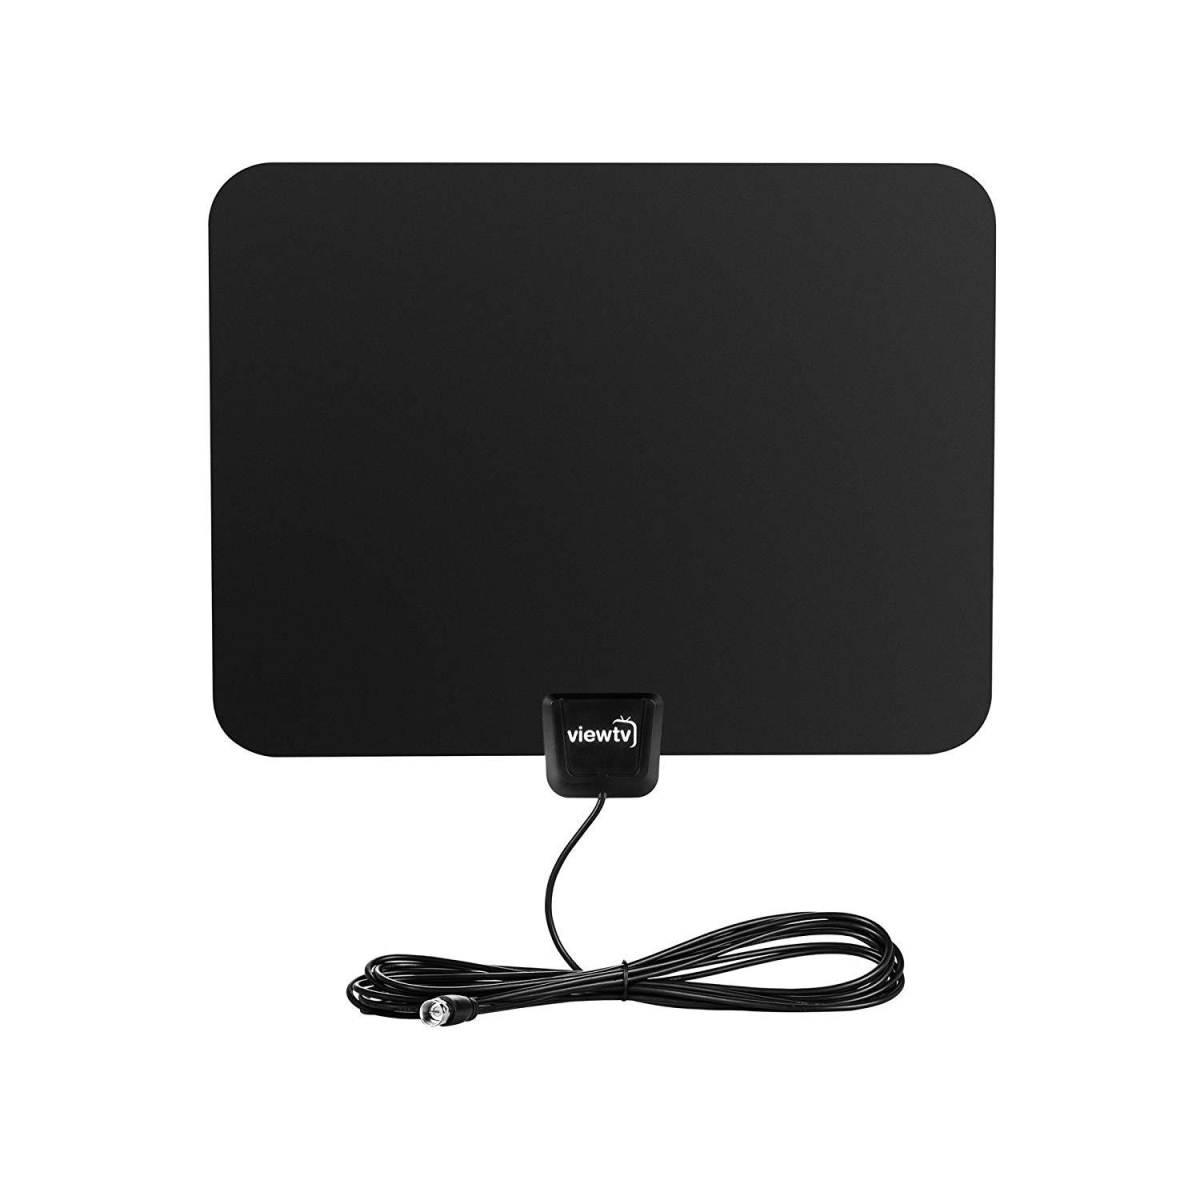 Hot stuffcosas calientes Digital Amplified HDTV Antenna Flat Indoor UHF & VHF 1080P with Detachable Signal Amplifier